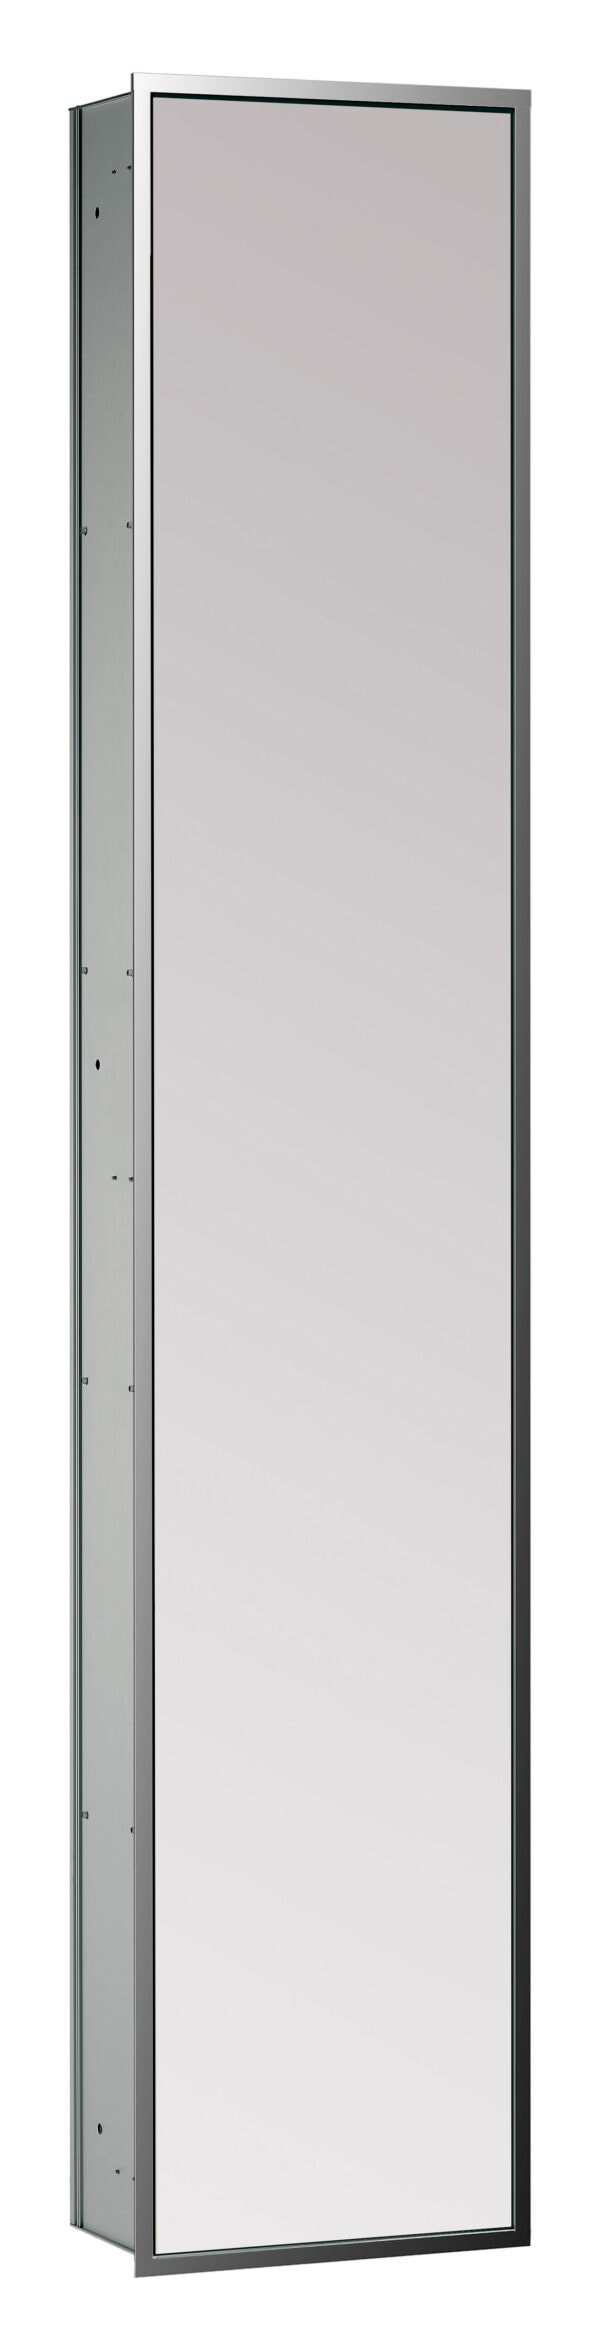 emco asis 300 Cabinet module with mirrored-door - built-in model - chrome/mirror, 314 mm